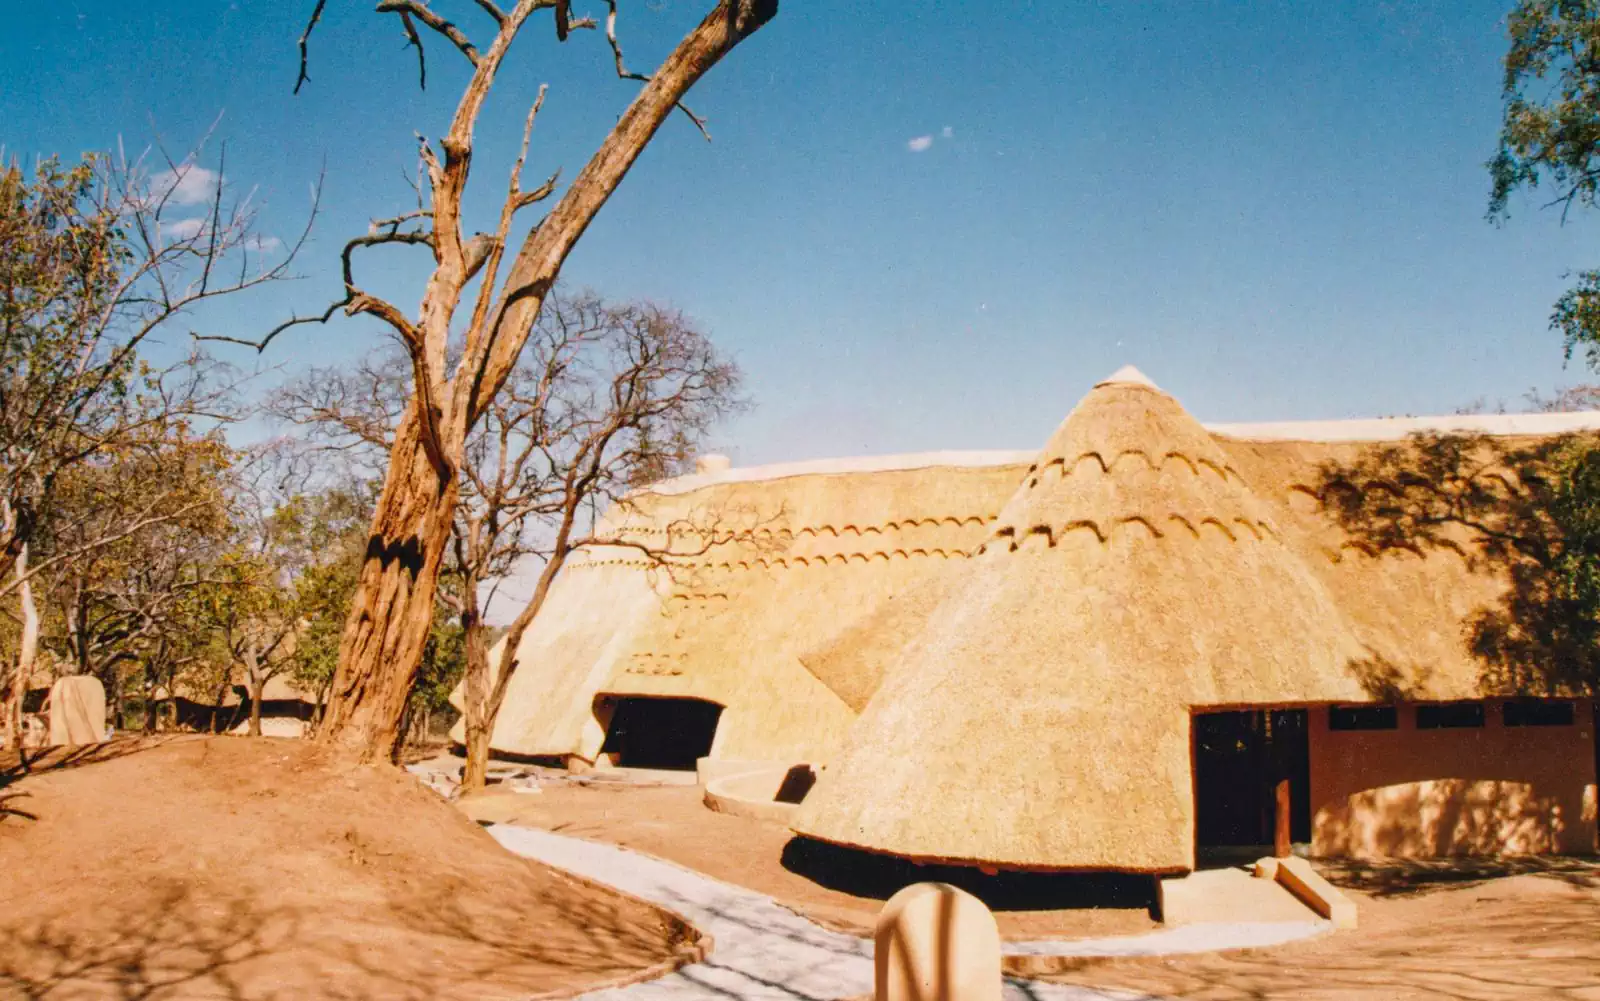 Wooden gumpole internal structure carrying thatched roof. Earthy and organic interior design by Harare based architect 